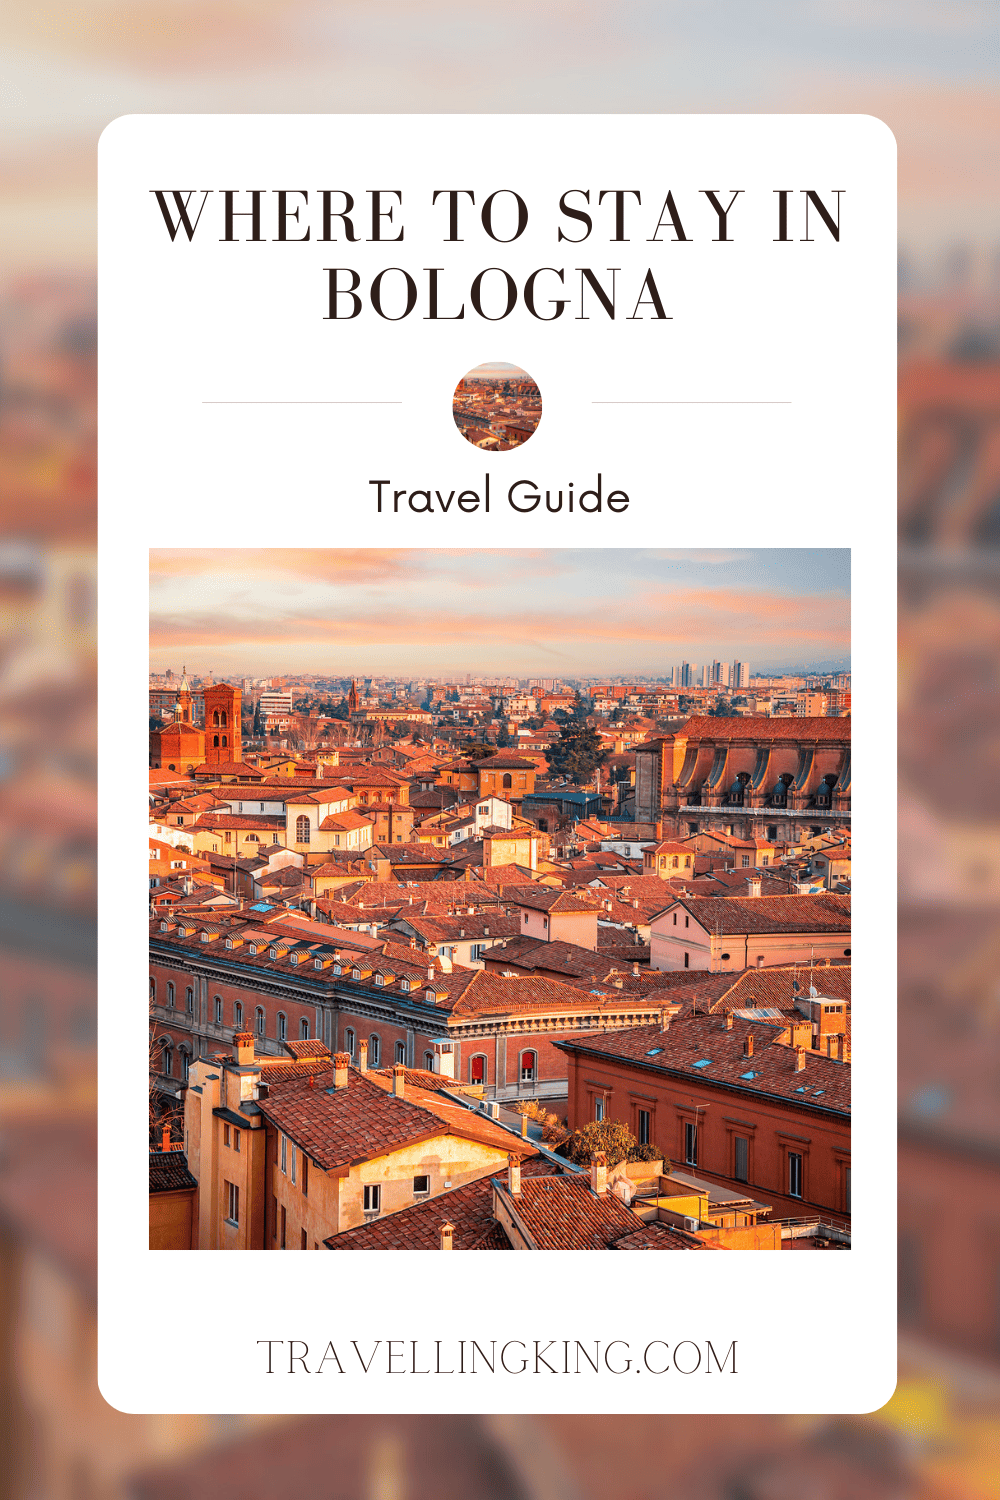 Where to stay in Bologna